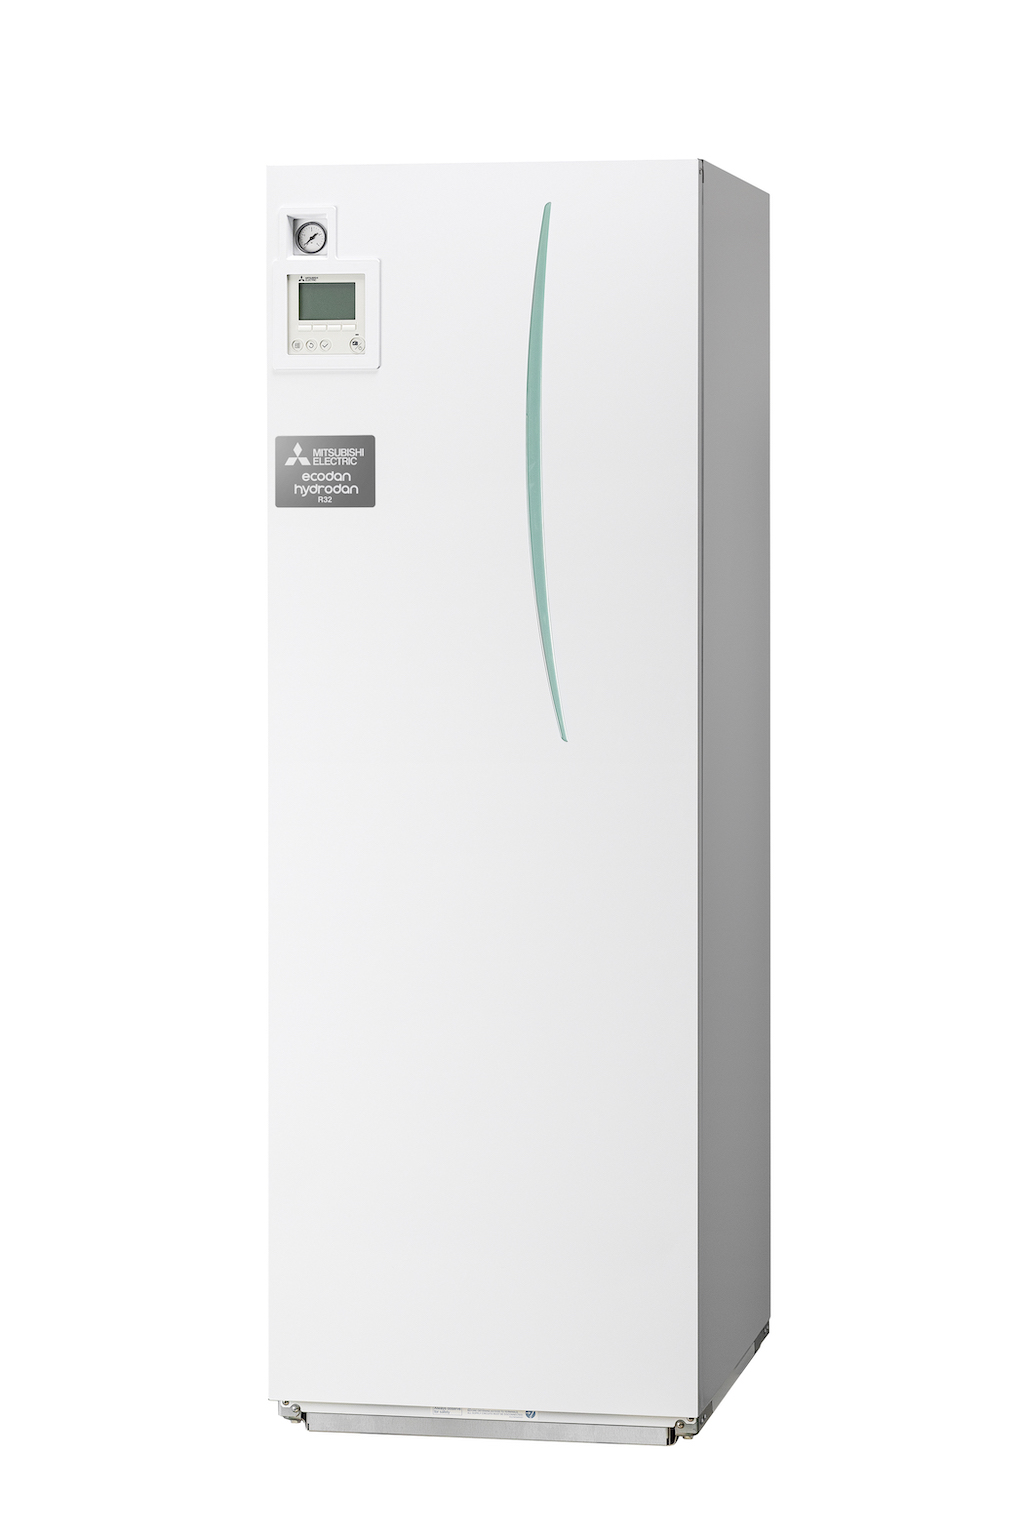 Mitsubishi Electric launches a low-carbon heat pump for the multi-residential sector